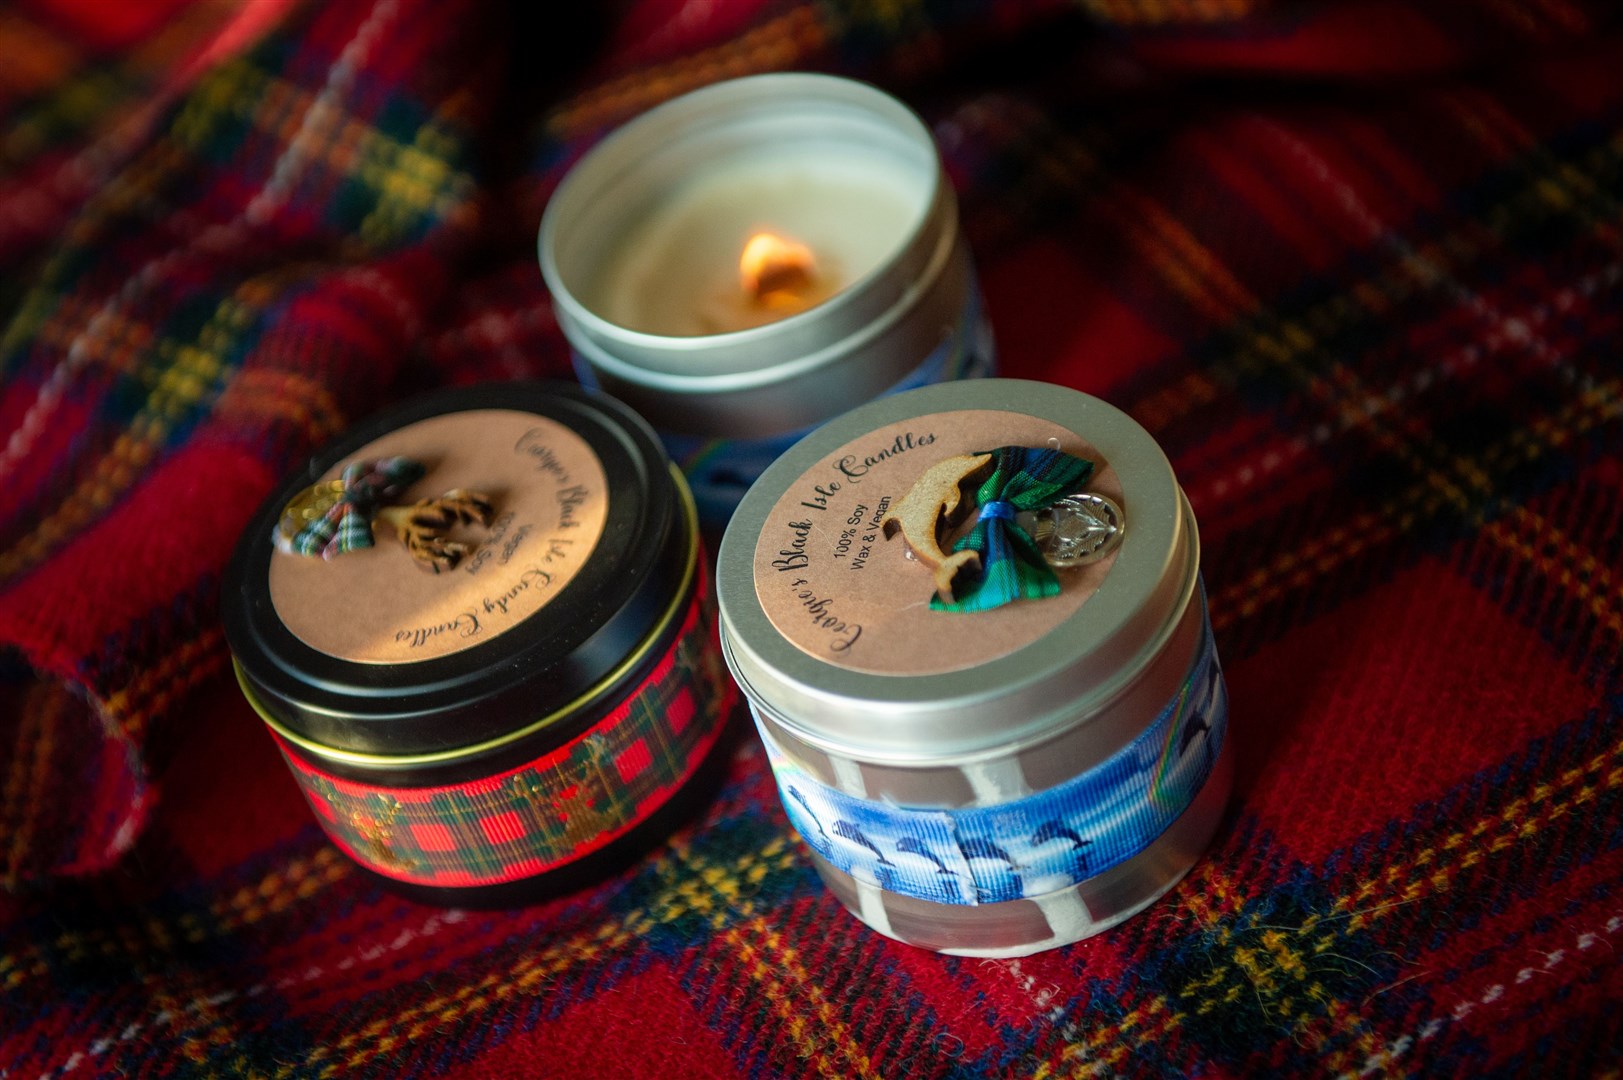 The candles have proven hugely popular already and were much in demand in the run up to Christmas and Valentine's Day.